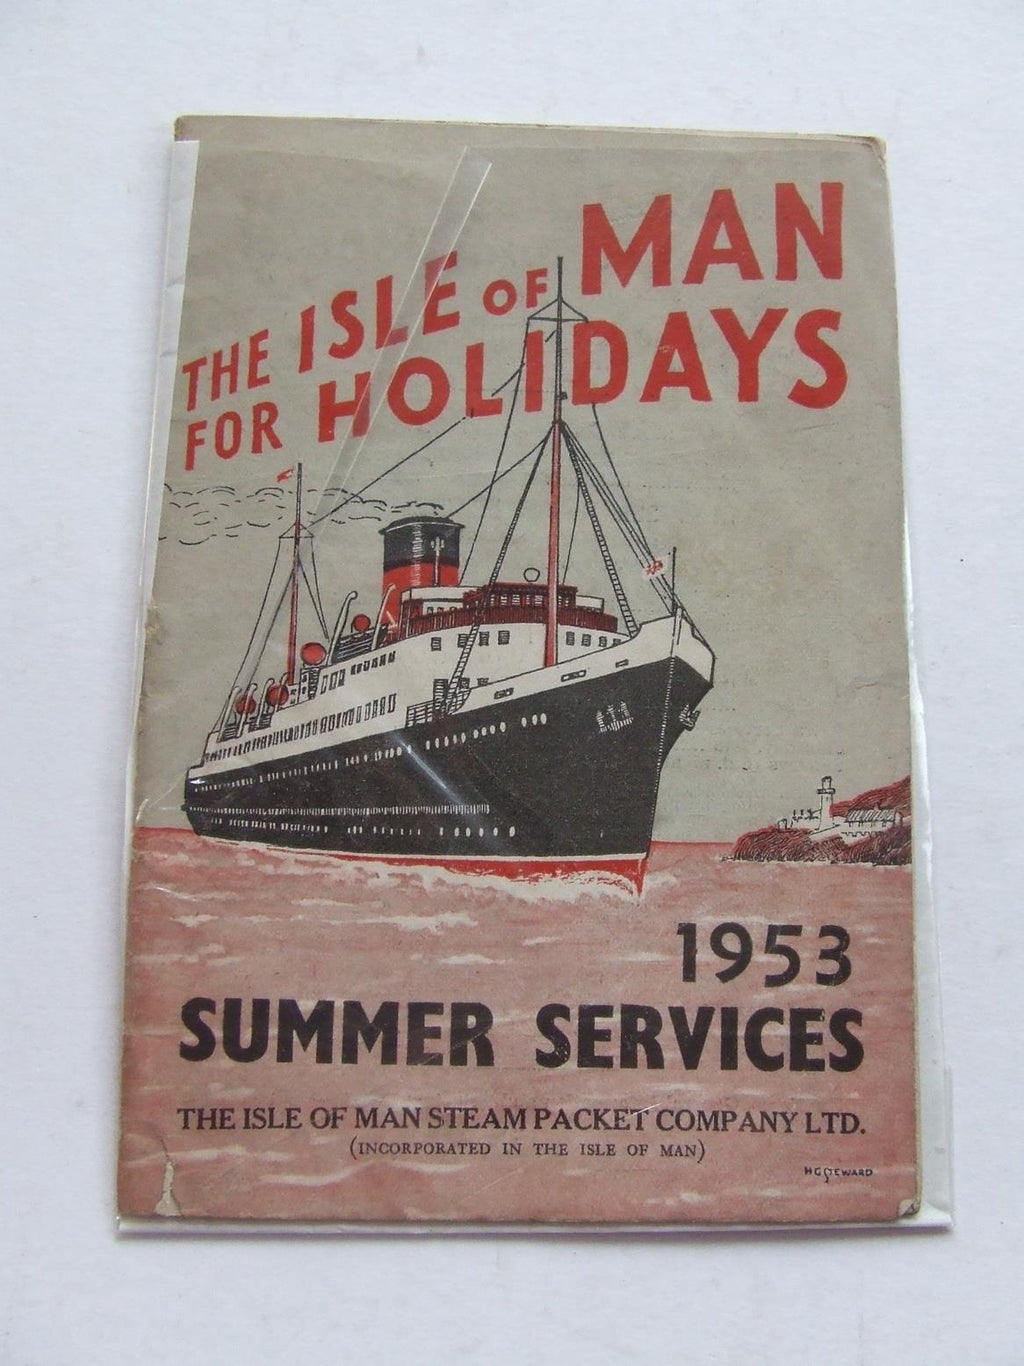 The Isle of Man for Holidays, 1953 summer services